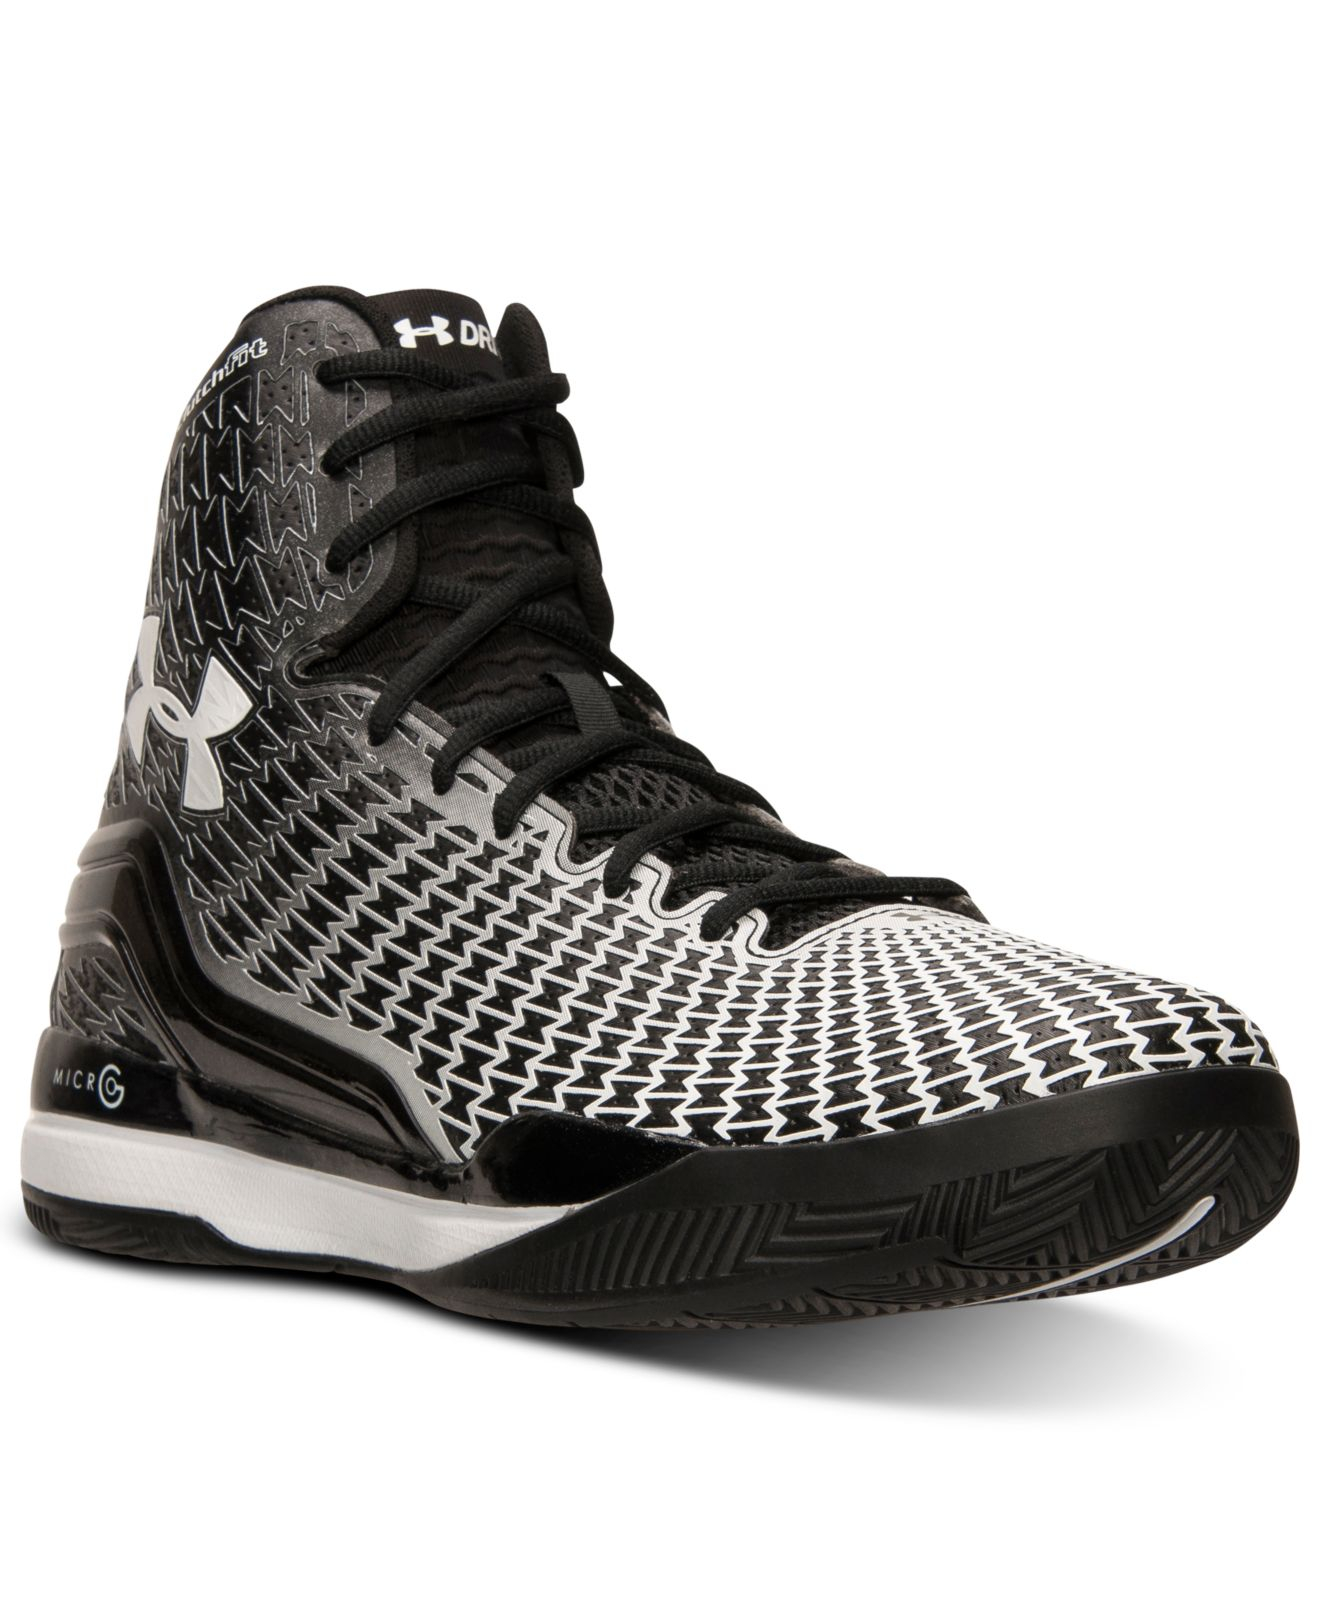 Under Armour Men'S Micro G Clutchfit Drive Basketball Sneakers From ...